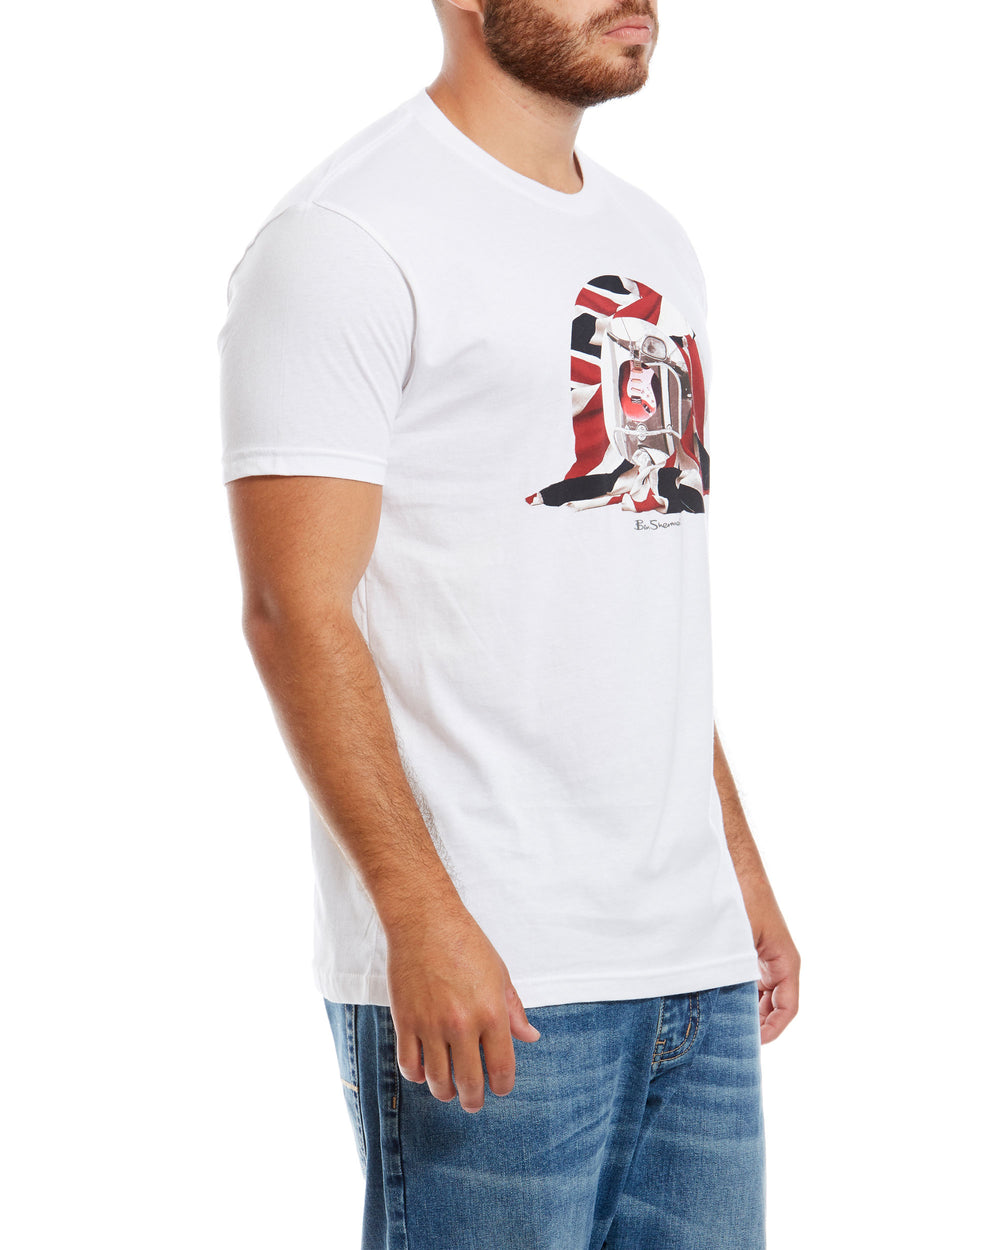 Scooter Target Graphic Tee - White